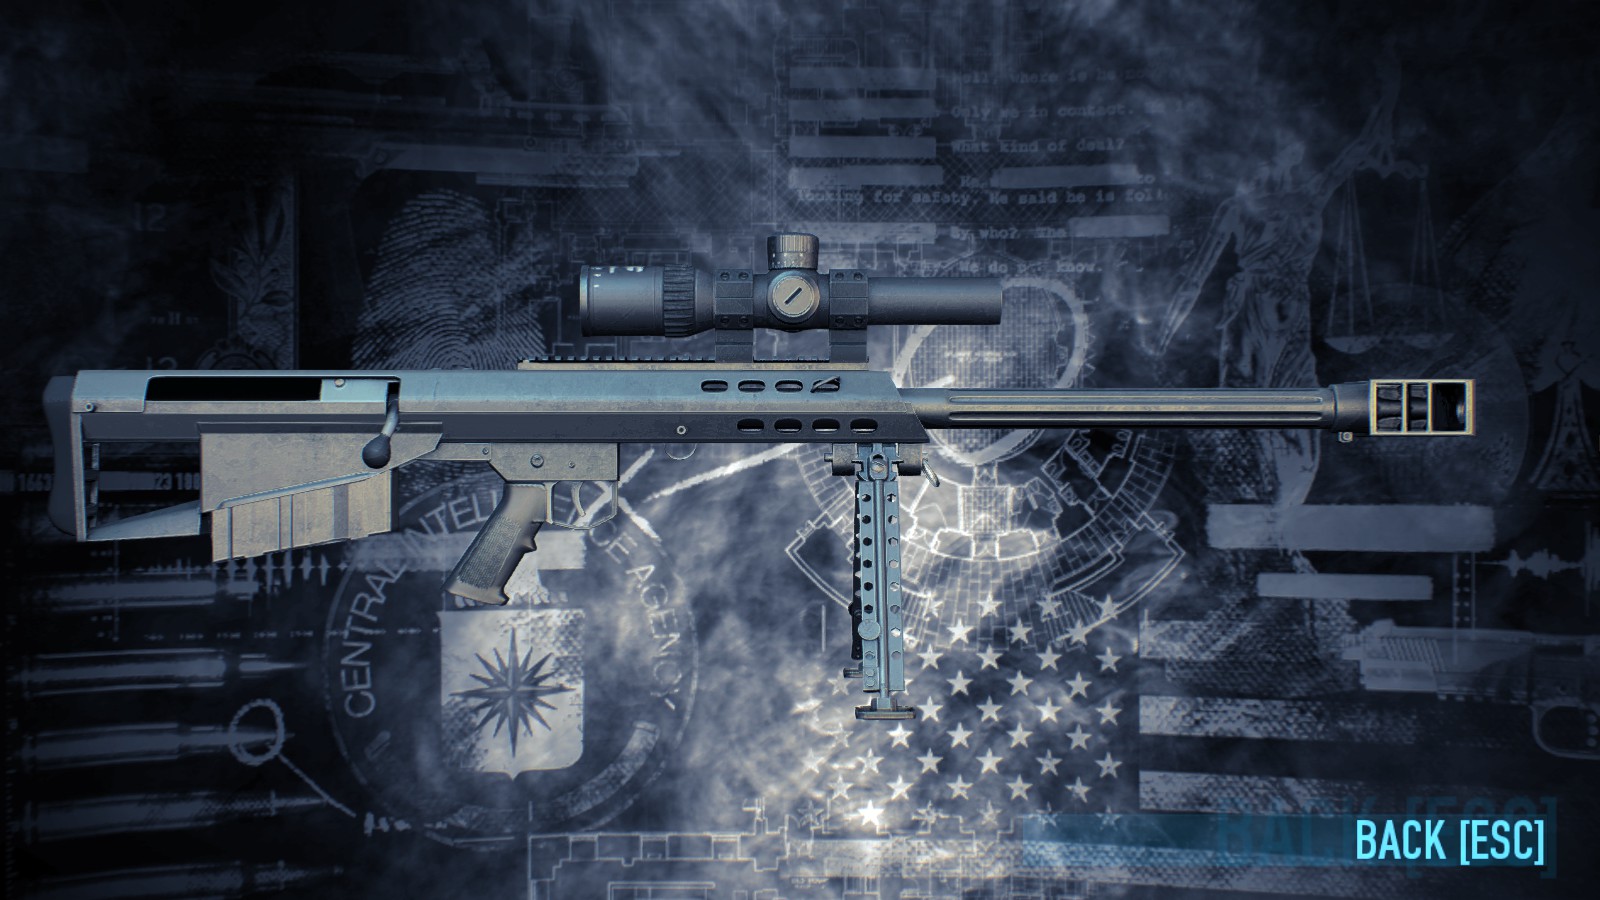 Are there sniper rifles in payday 2